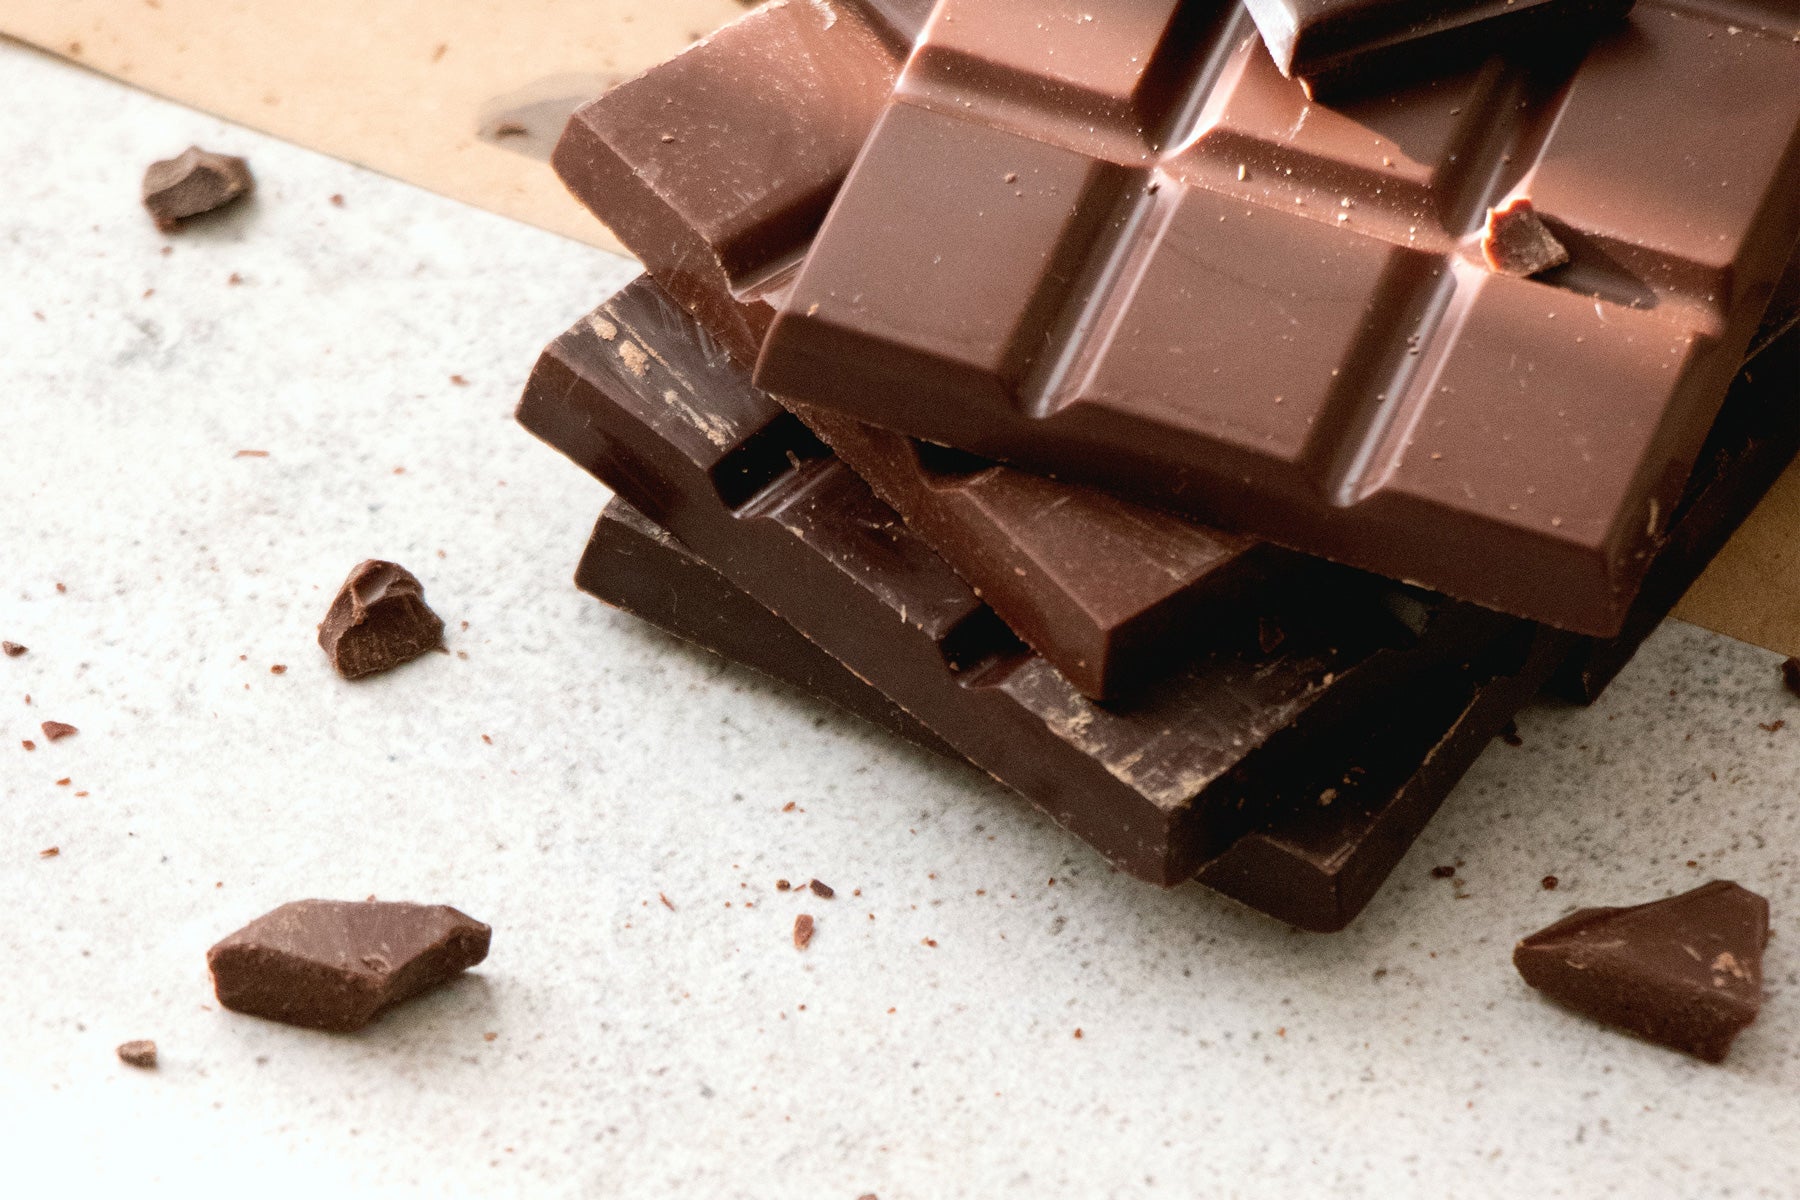 Craving Chocolate? You May Be Magnesium Deficient